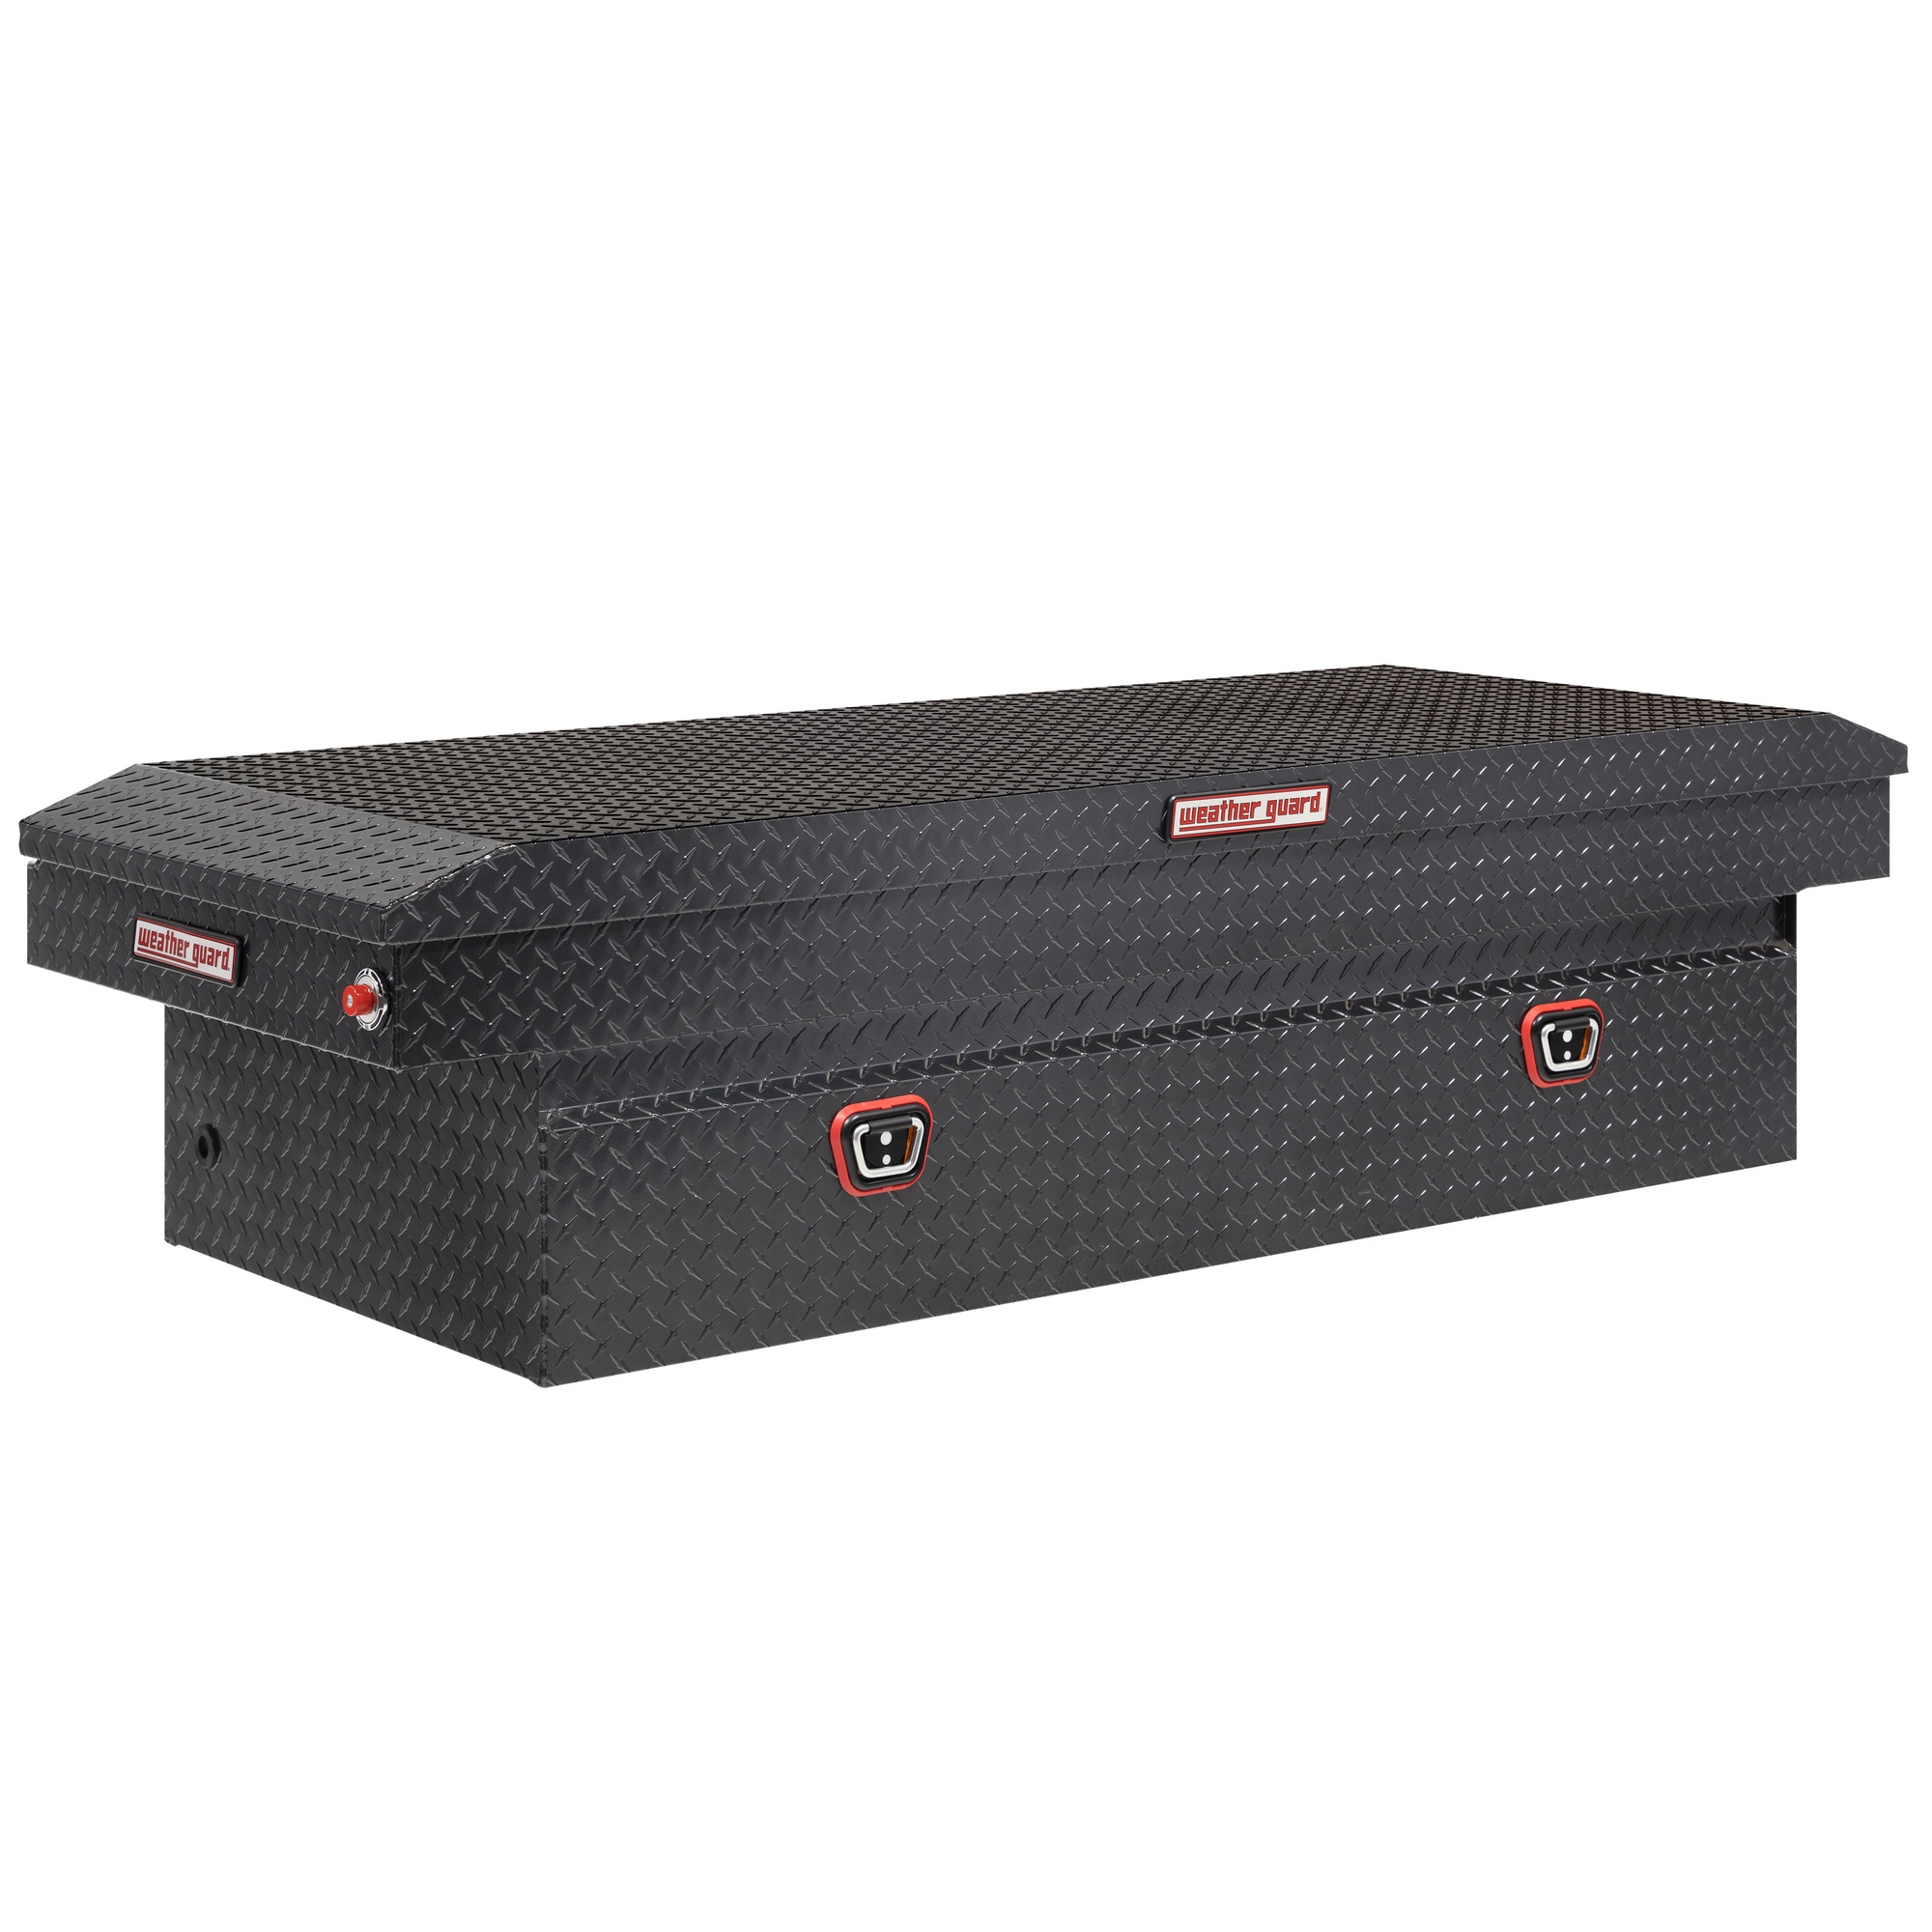 71.5Inch Saddle Box, Width 72 in, Material Aluminum, Color Finish Gray, Model - Weather Guard 117-6-03